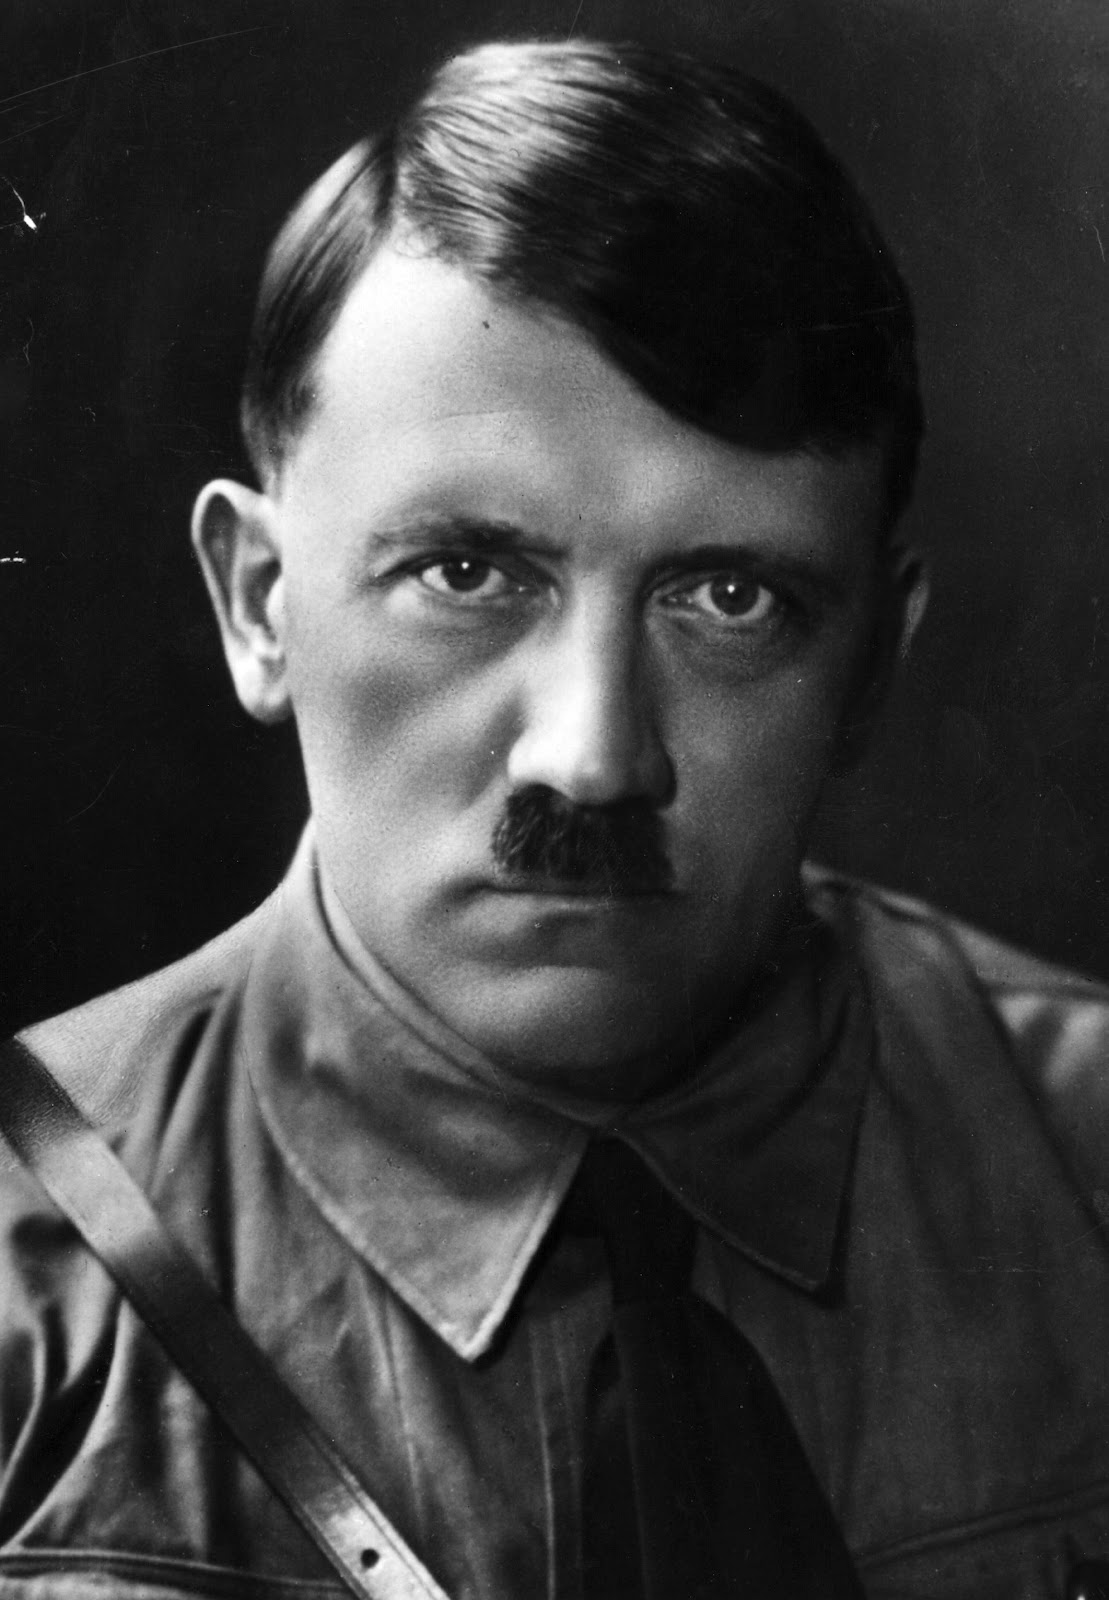 images of the death of adolf hitler wallpaper